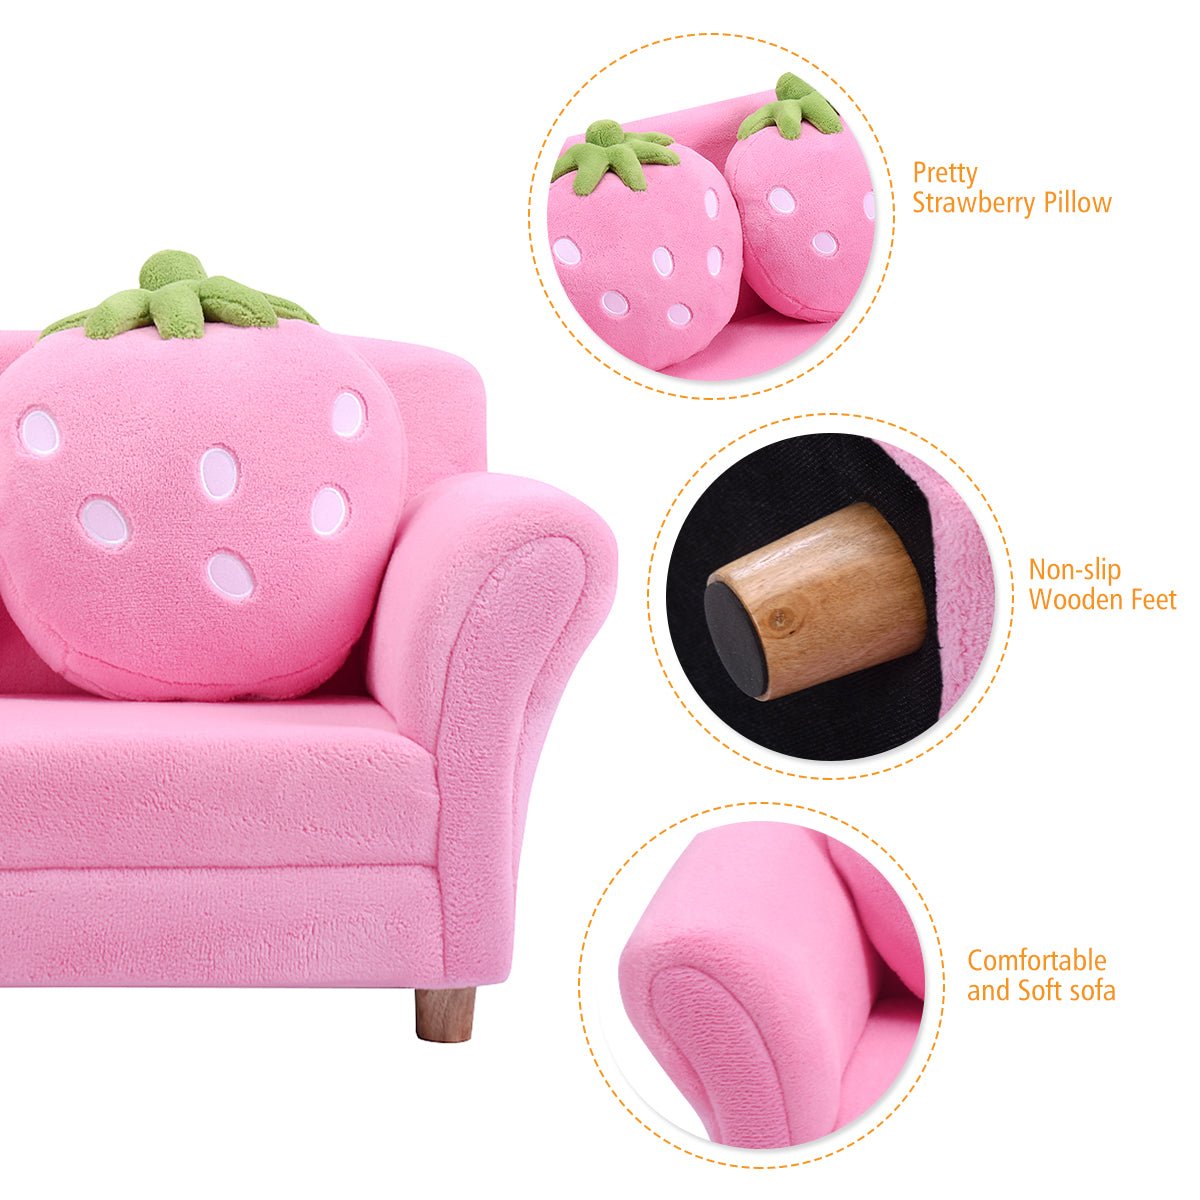 2-Seat Children's Sofa: Lounge Bed with Charming Strawberry Pillows for Kids